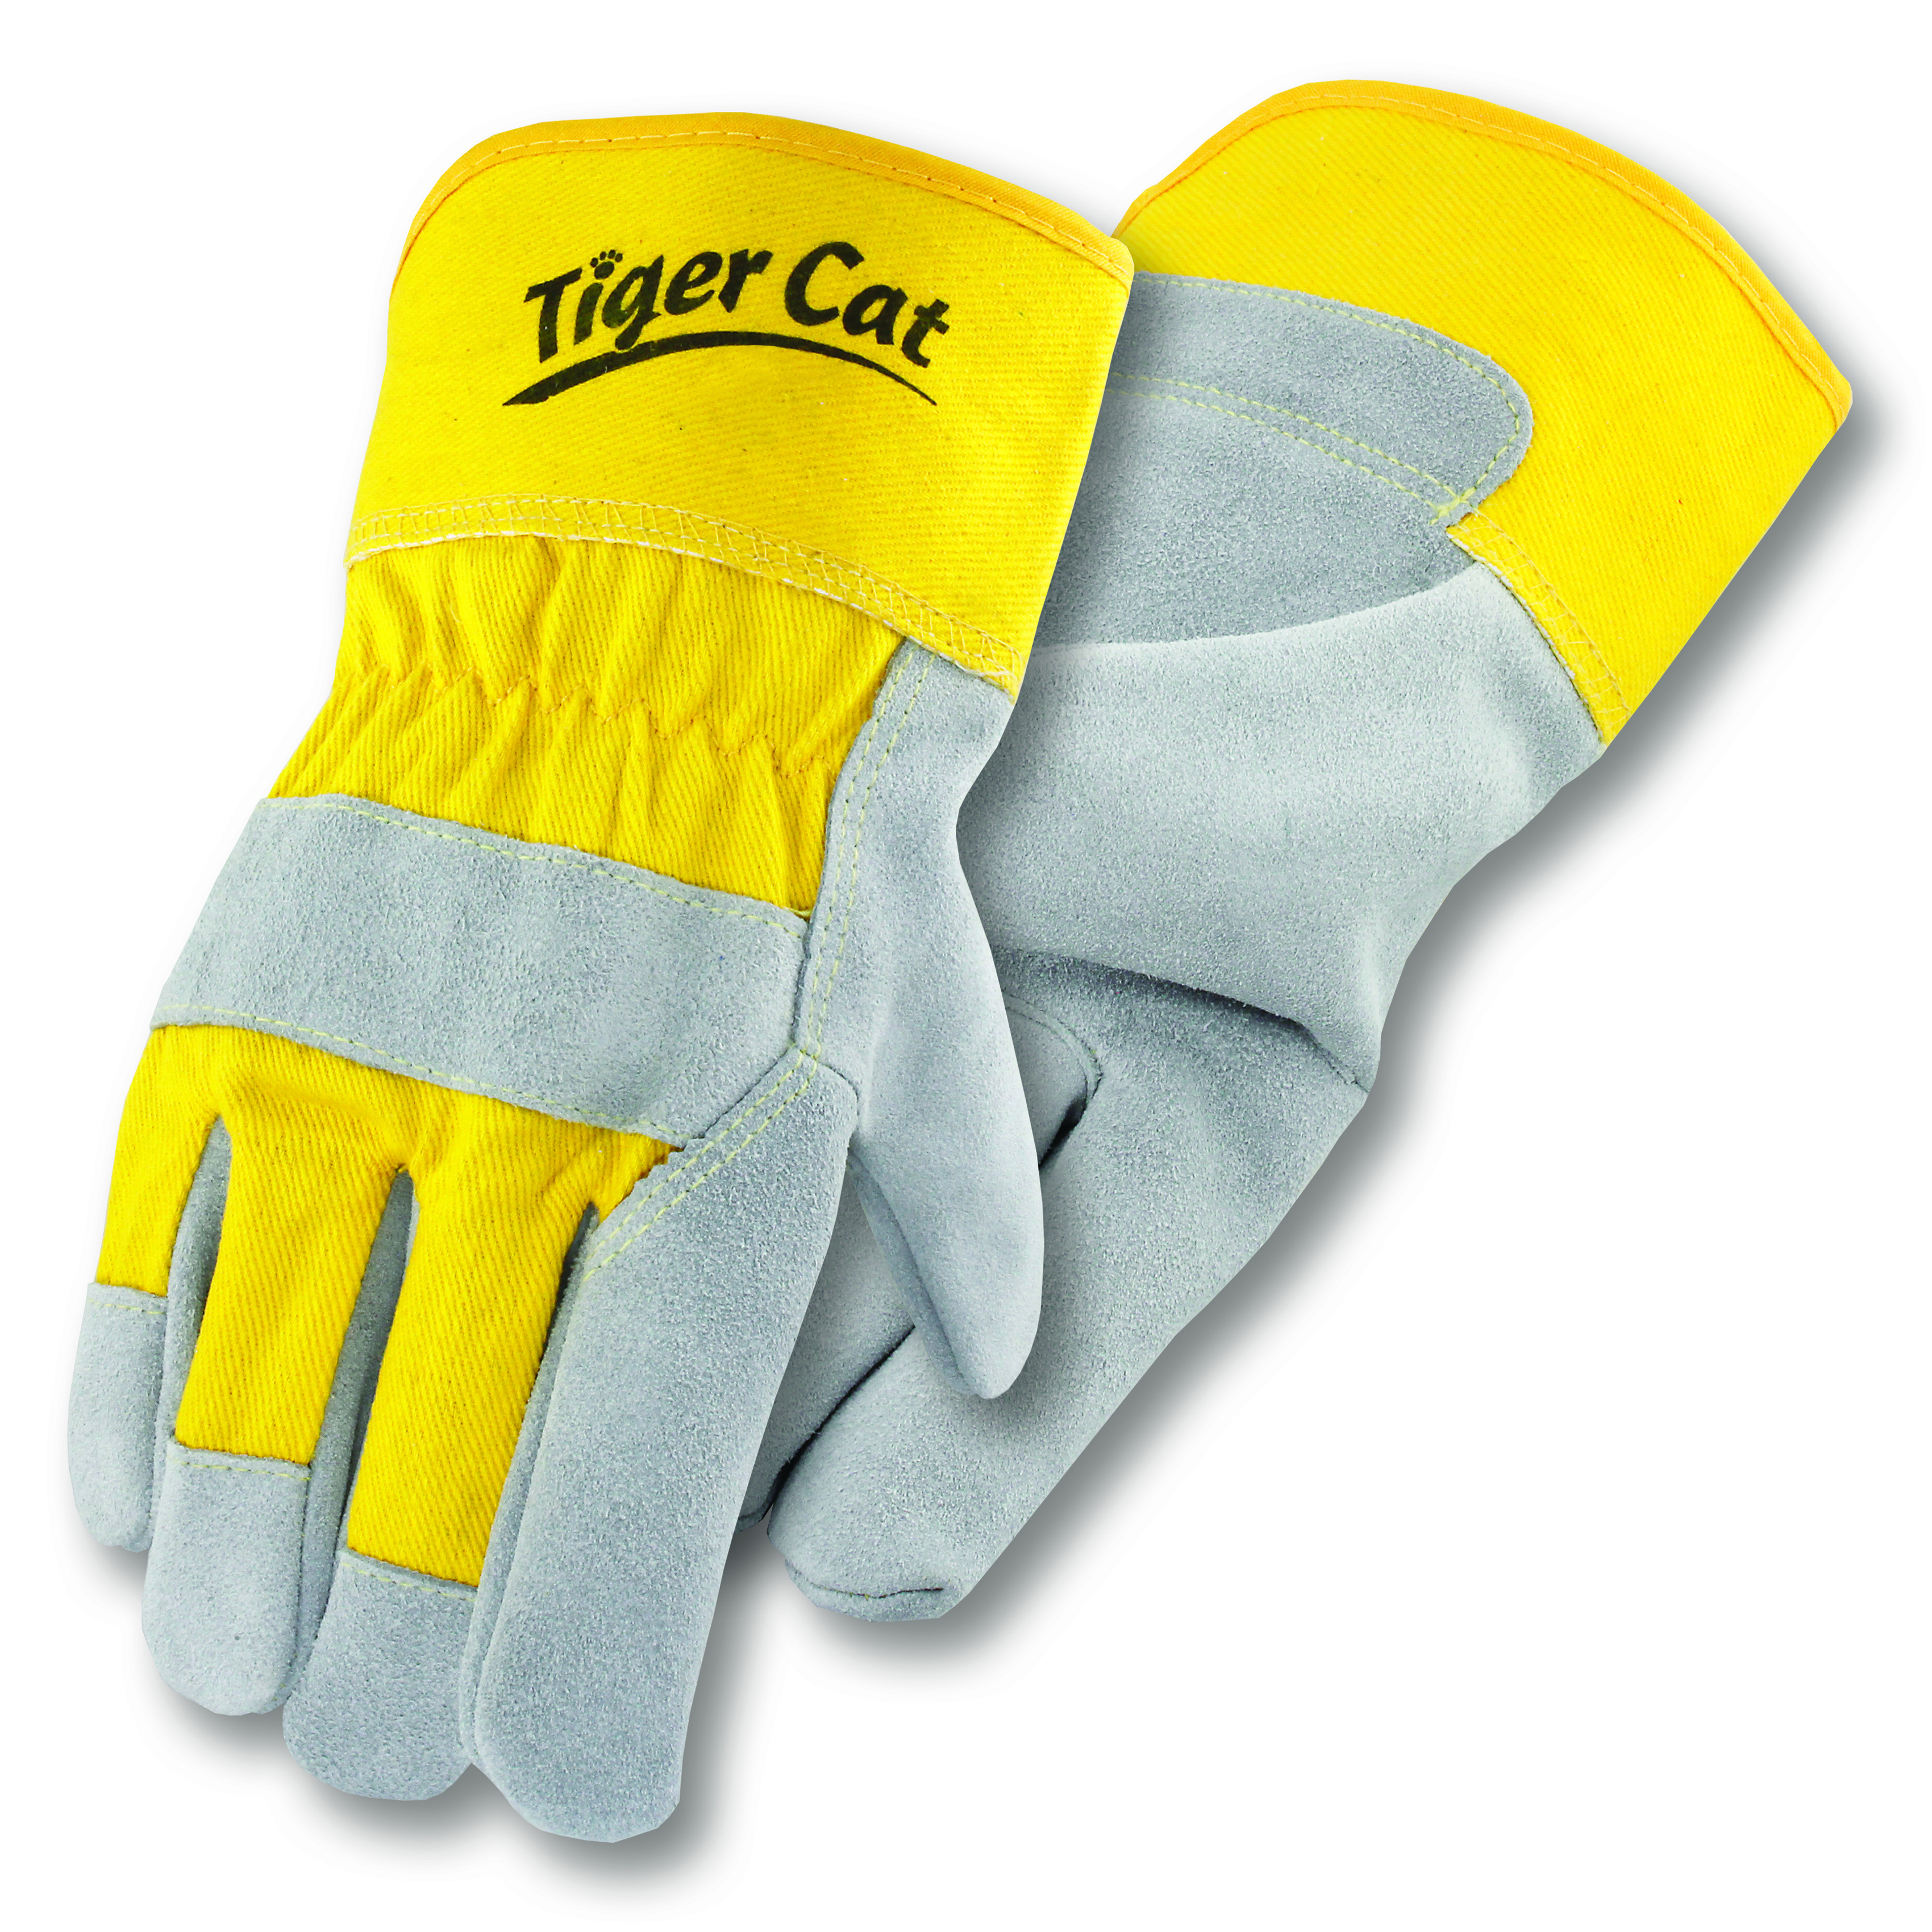 Tiger Cat&trade; Premium Leather Palm Gloves, Safety Cuff, Sewn with Cut Resistant Thread, 1 PR